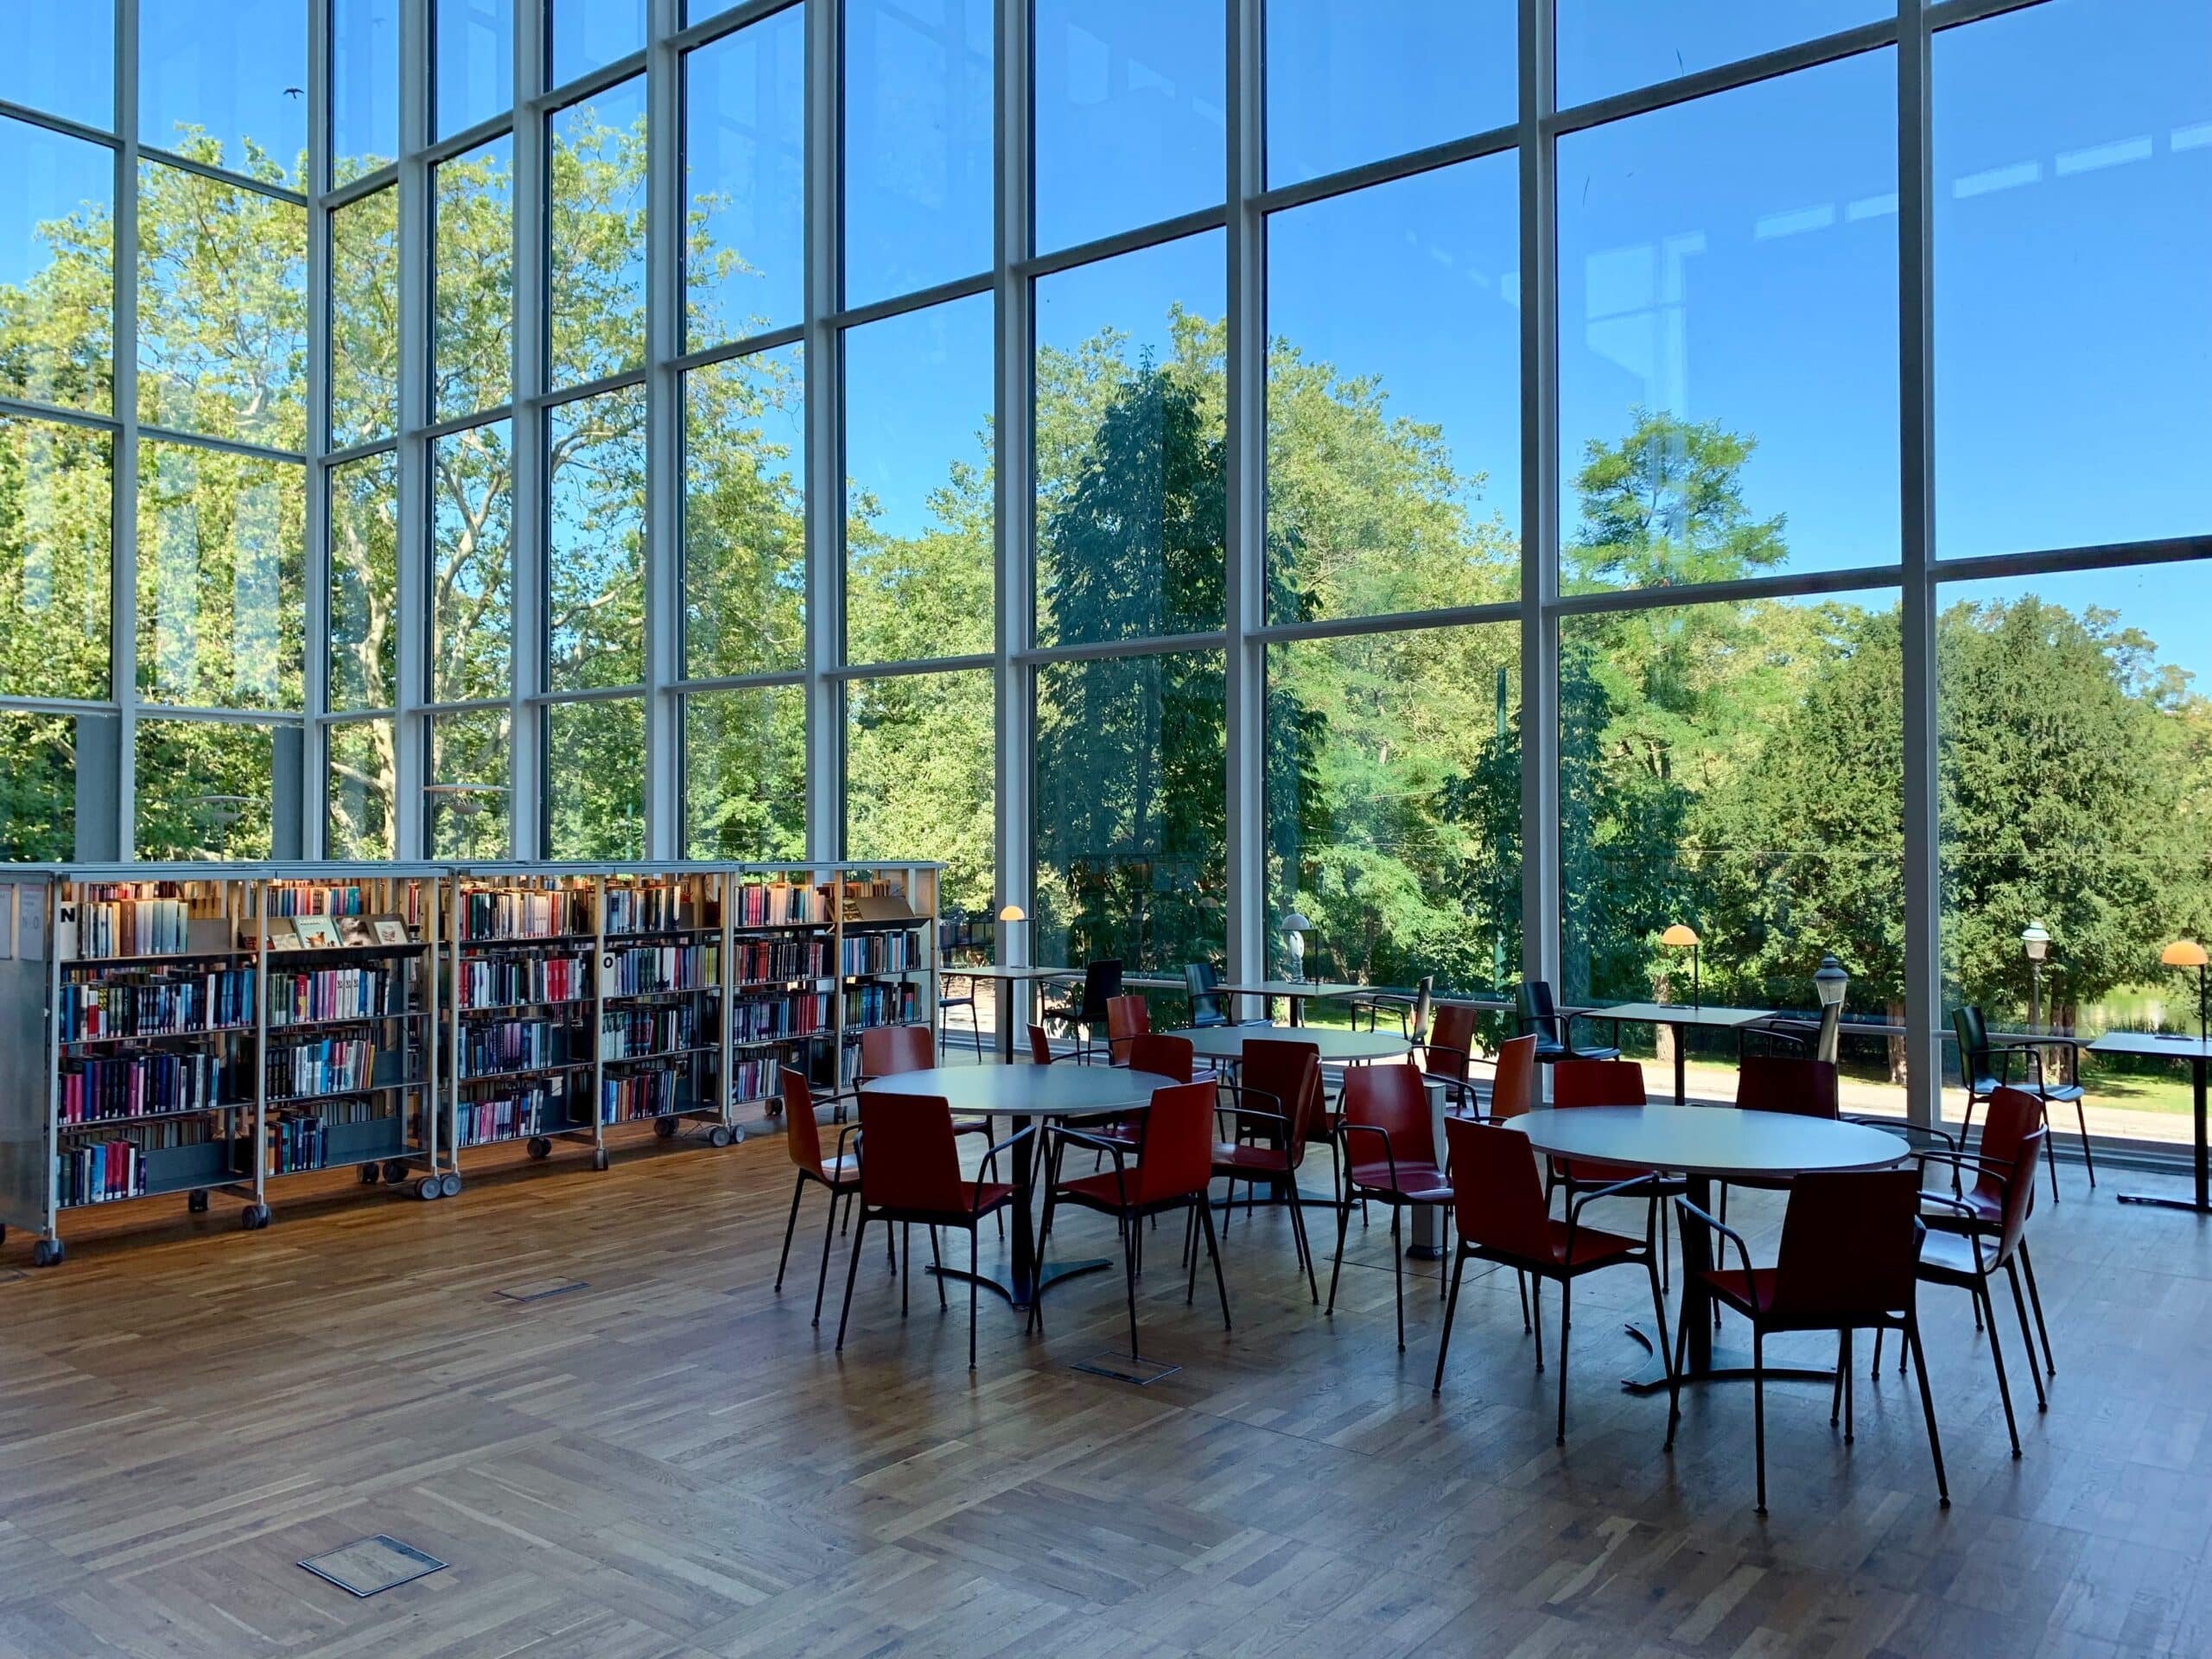 View of a Library with Tables, Big Windows and Trees